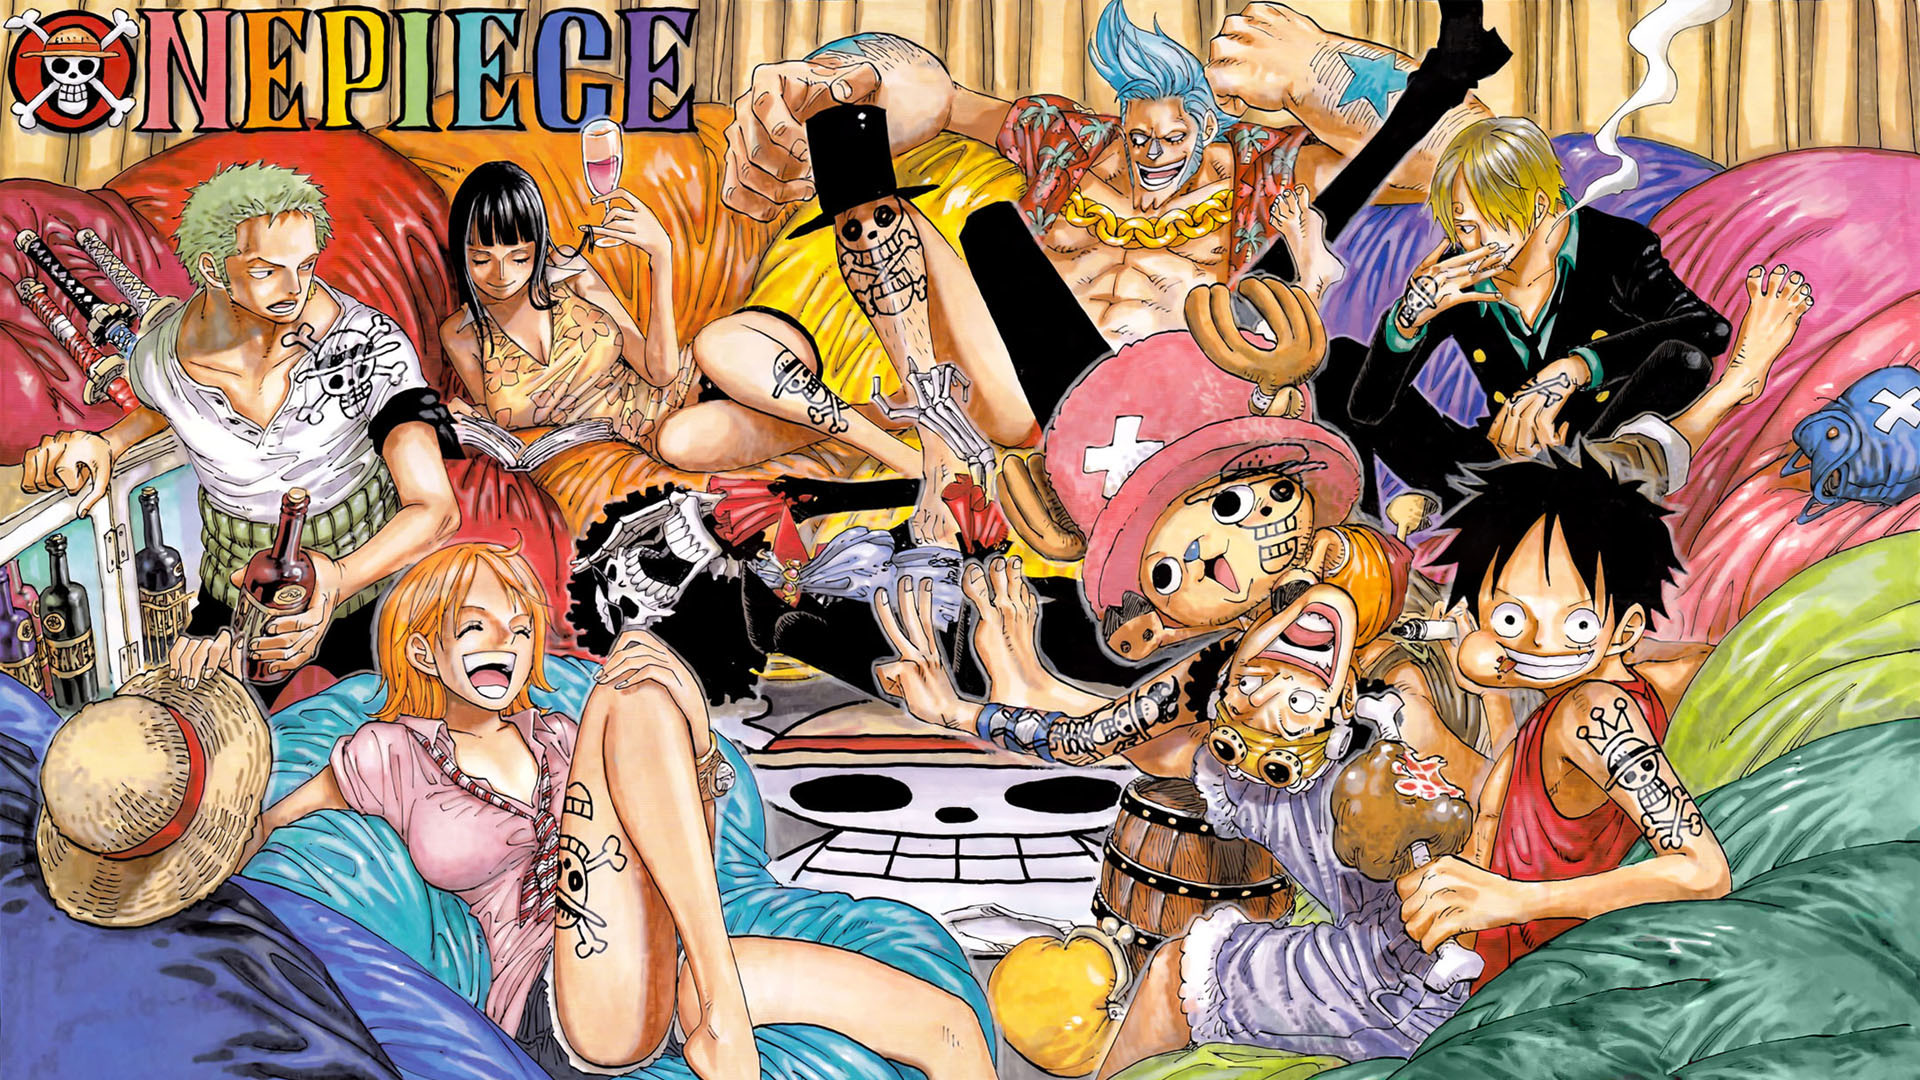 1920x1080 ... Attachment file for One Piece Wallpaper - The Straw Hat Pirates Crew in  Relax ...